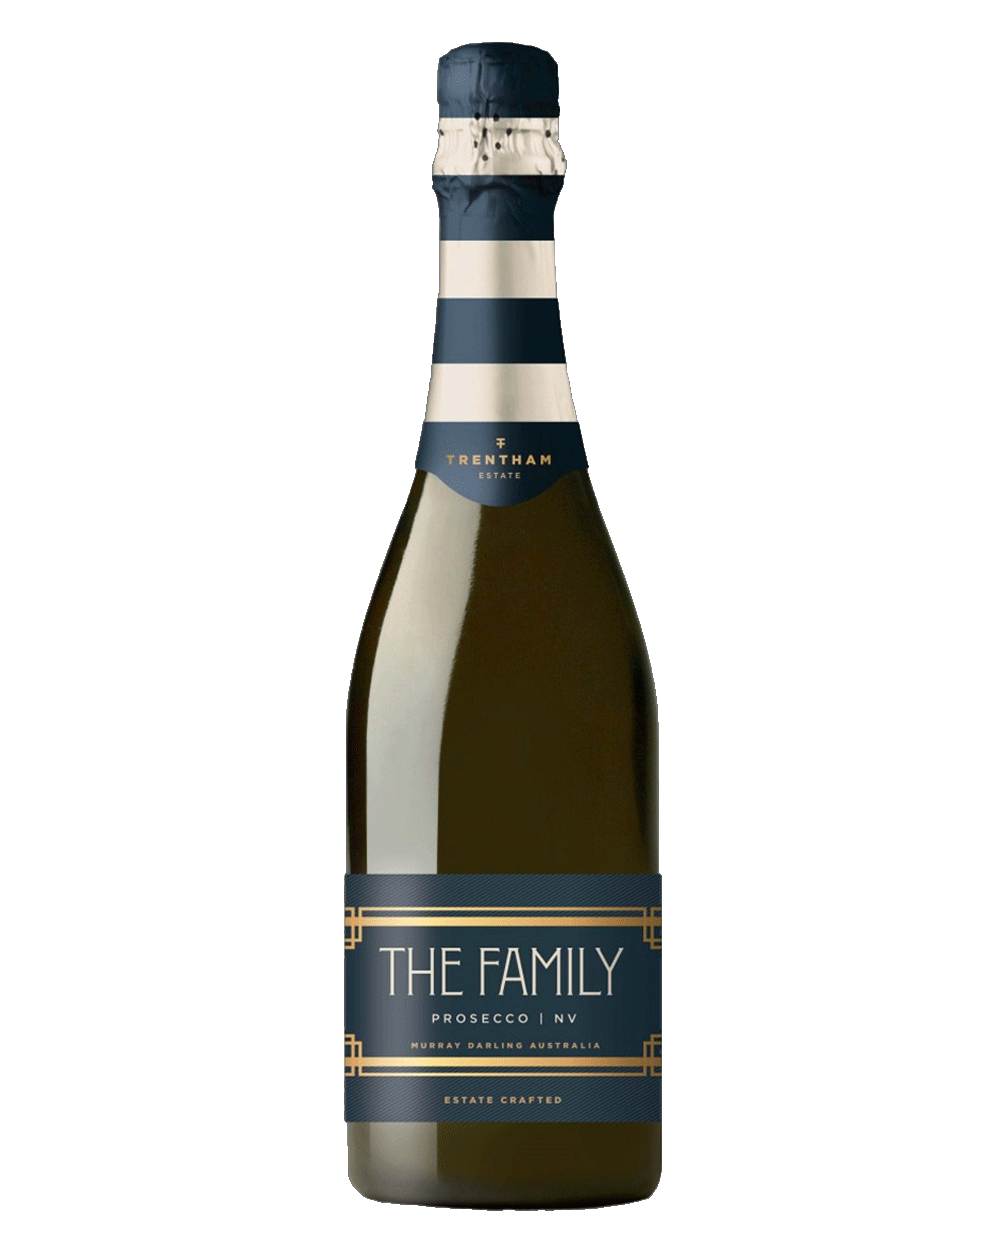 Trentham-The-Family-Prosecco